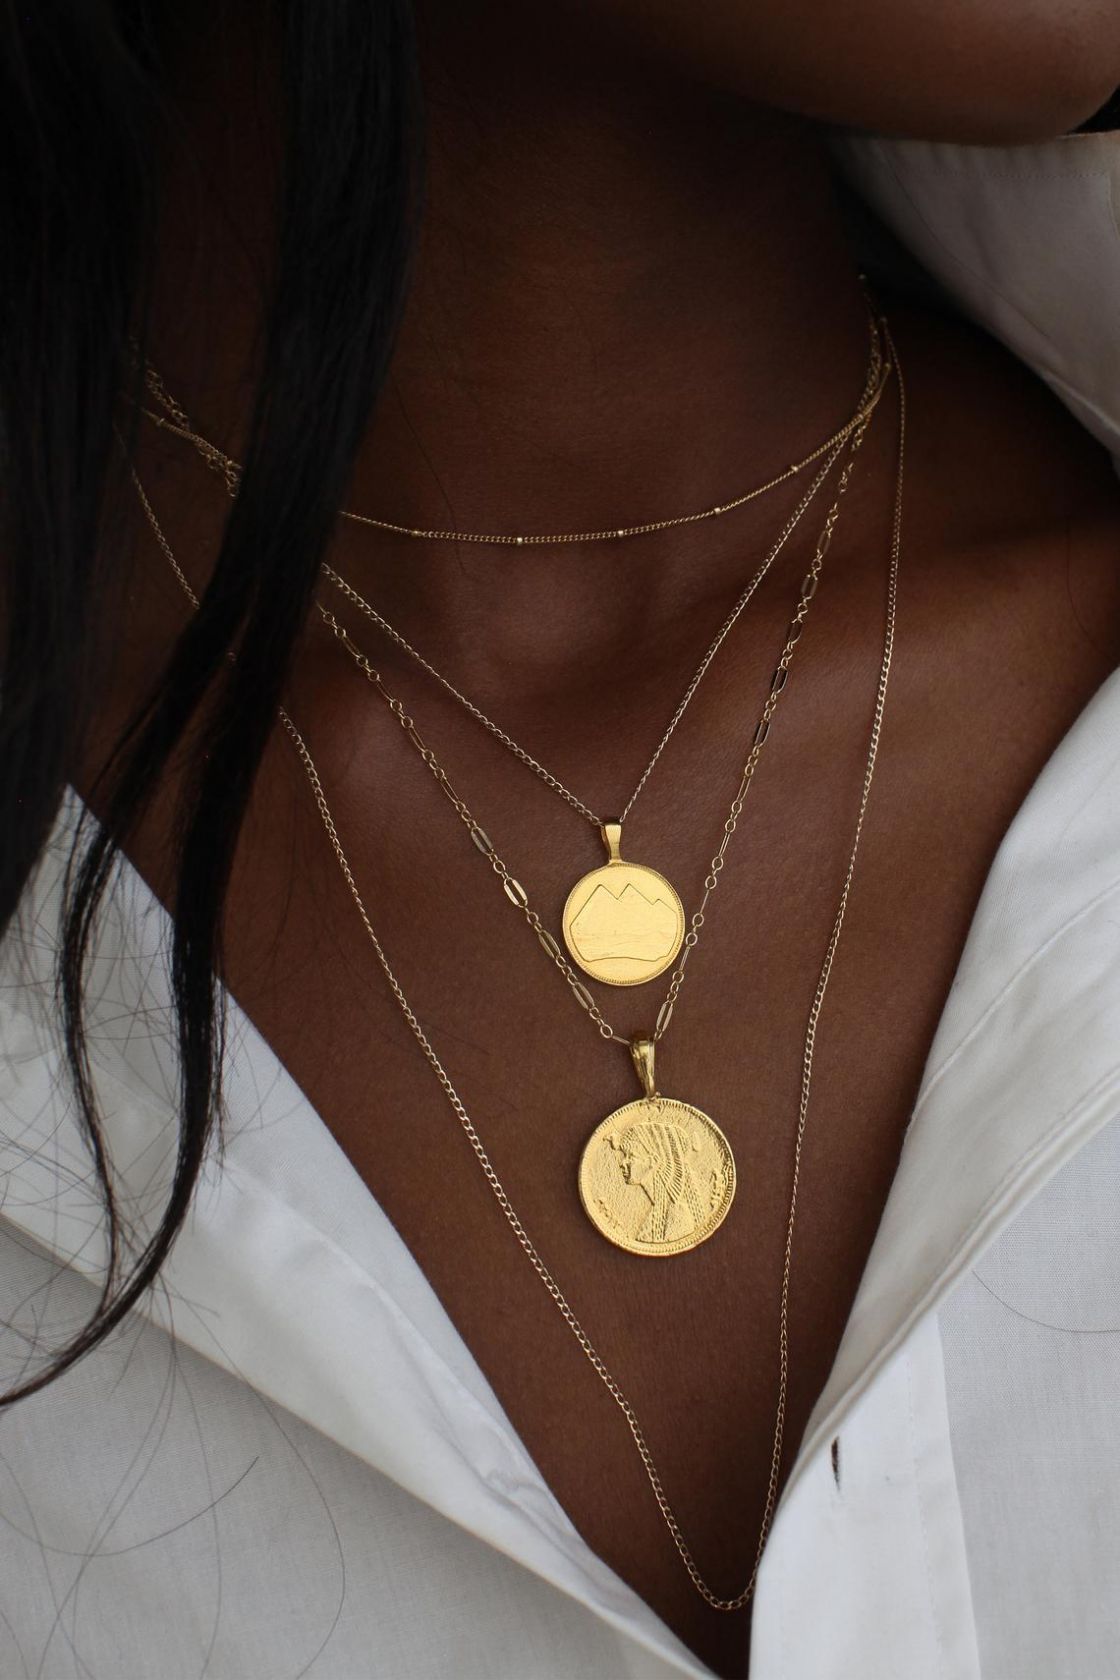 DESIGNER GOLD PLATED KERALA STYLE COIN NECKLACE M44 – Urshi Collections